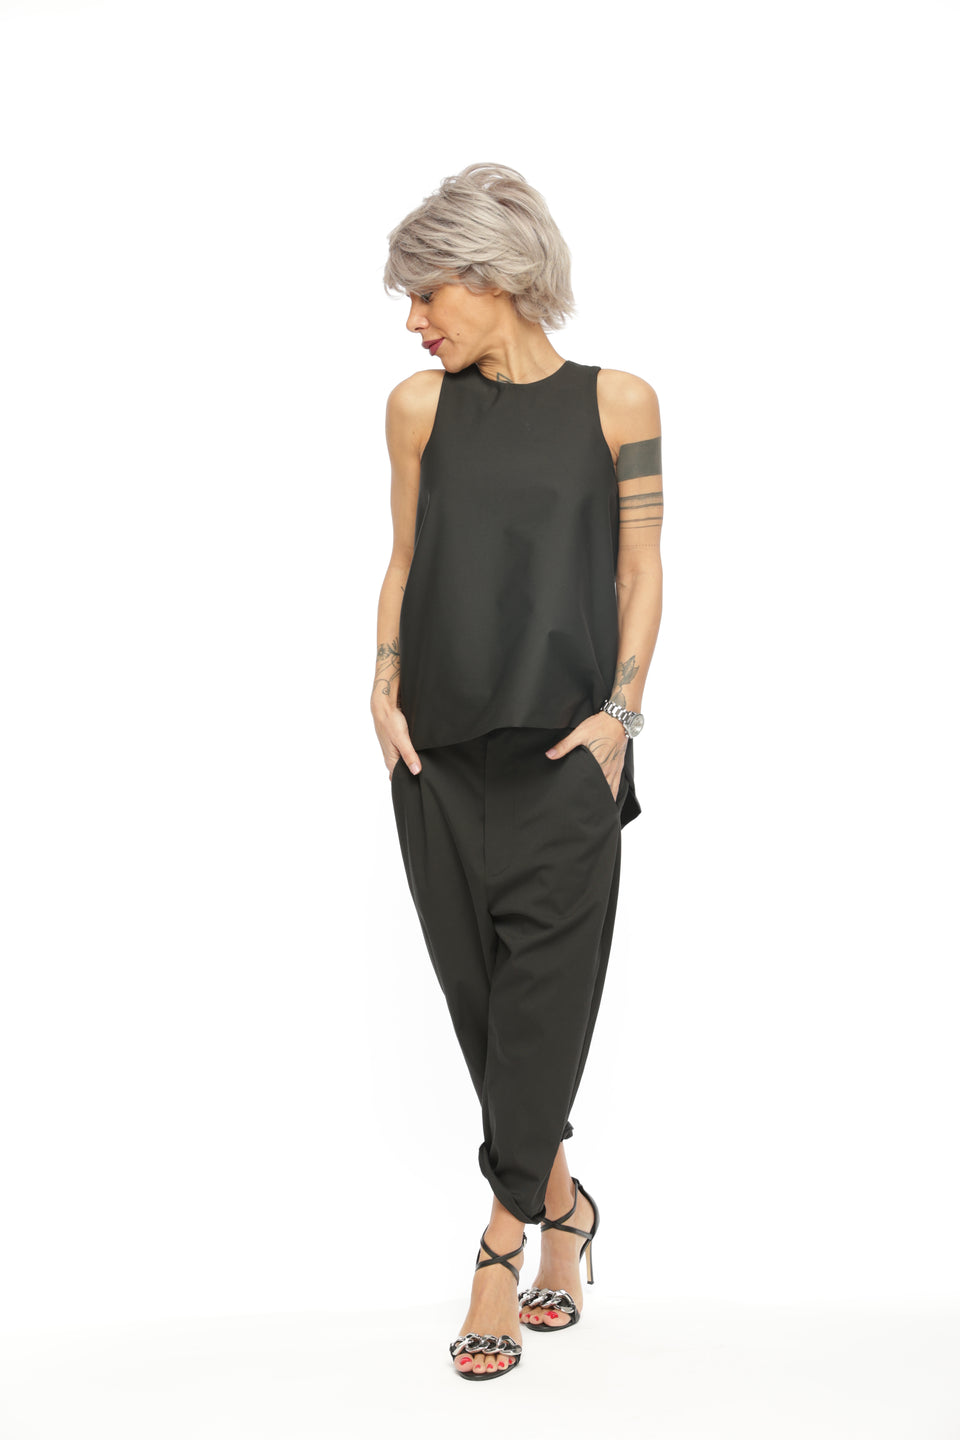 2-PIECE BOXY CRISS-CROSS BACK TIERED TOP AND RELAXED PANTS CO-ORD SET IN BLACK